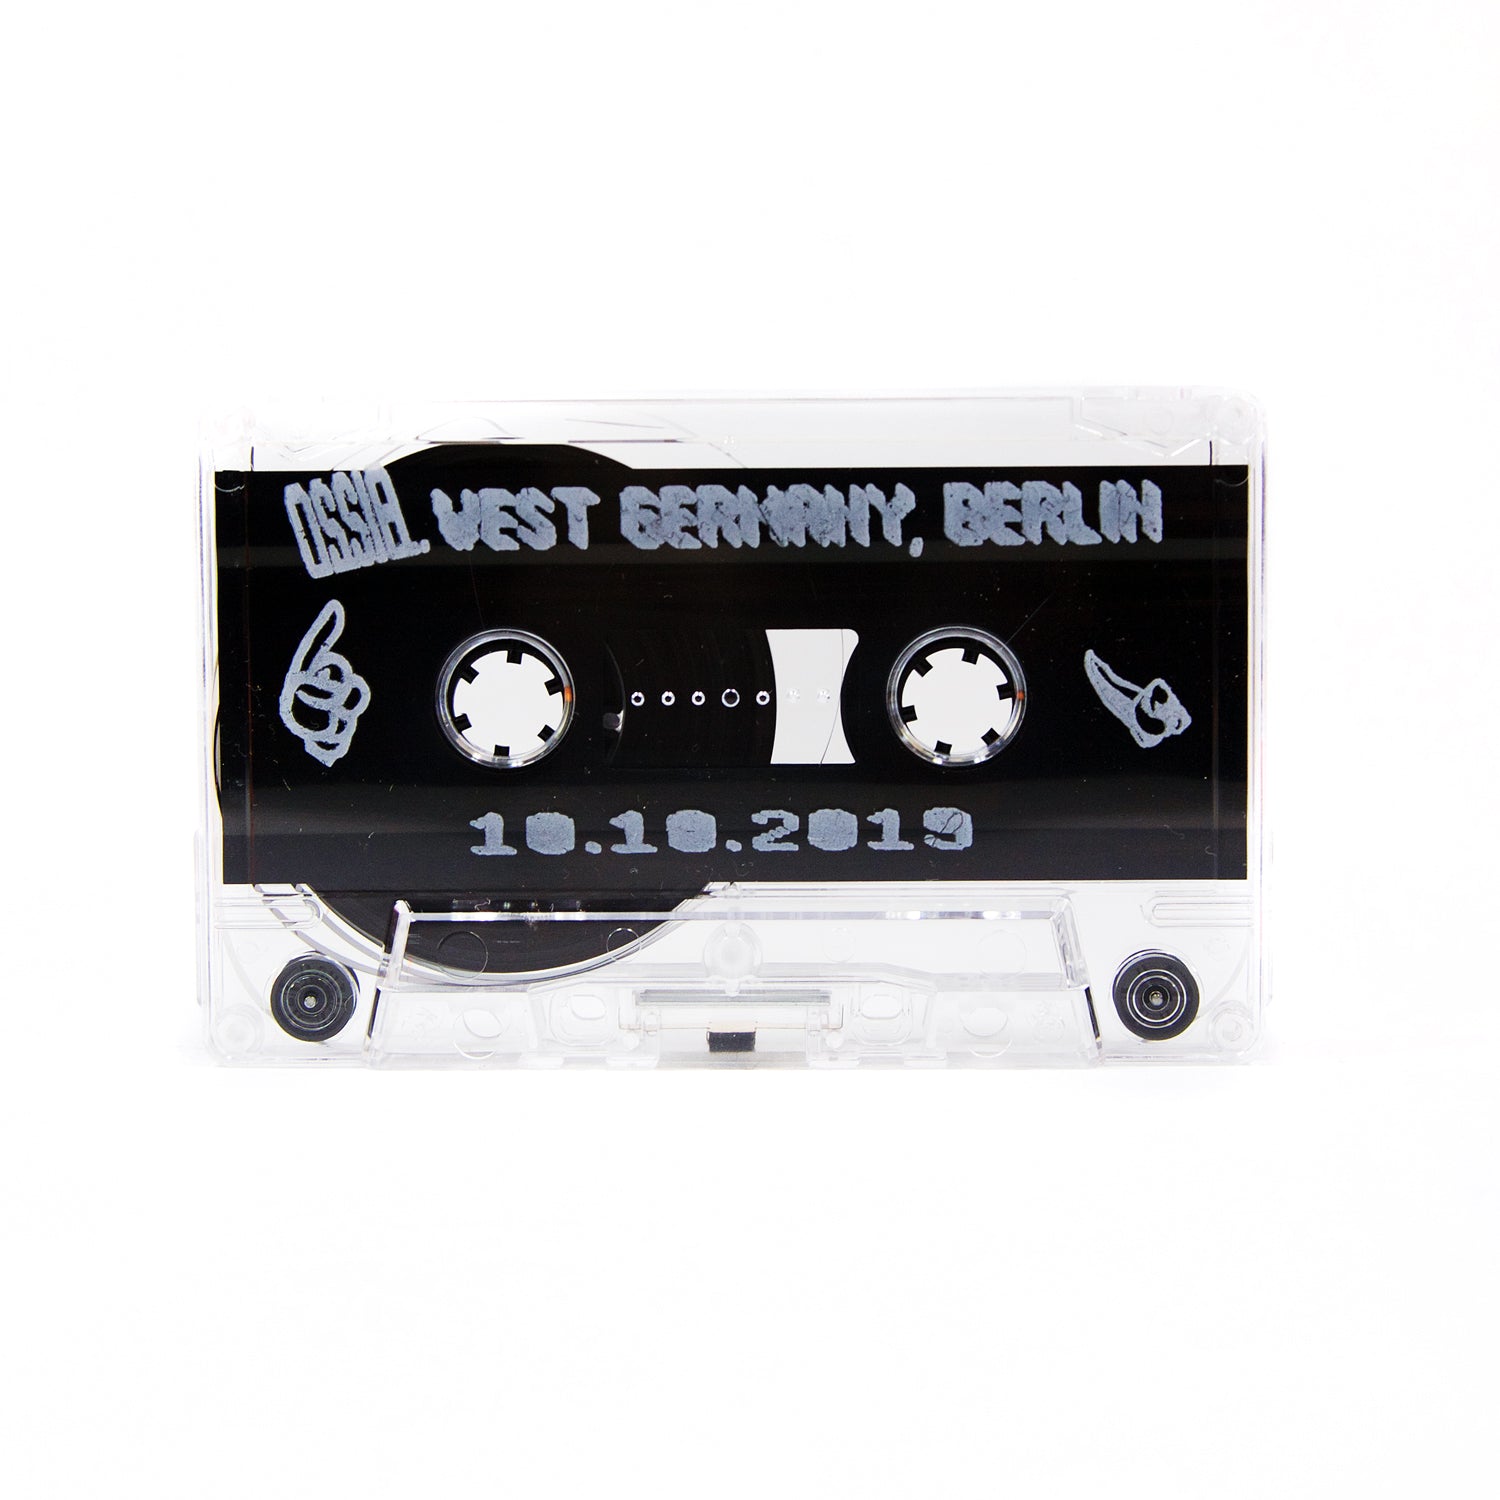 West-germany-tape-detail-2